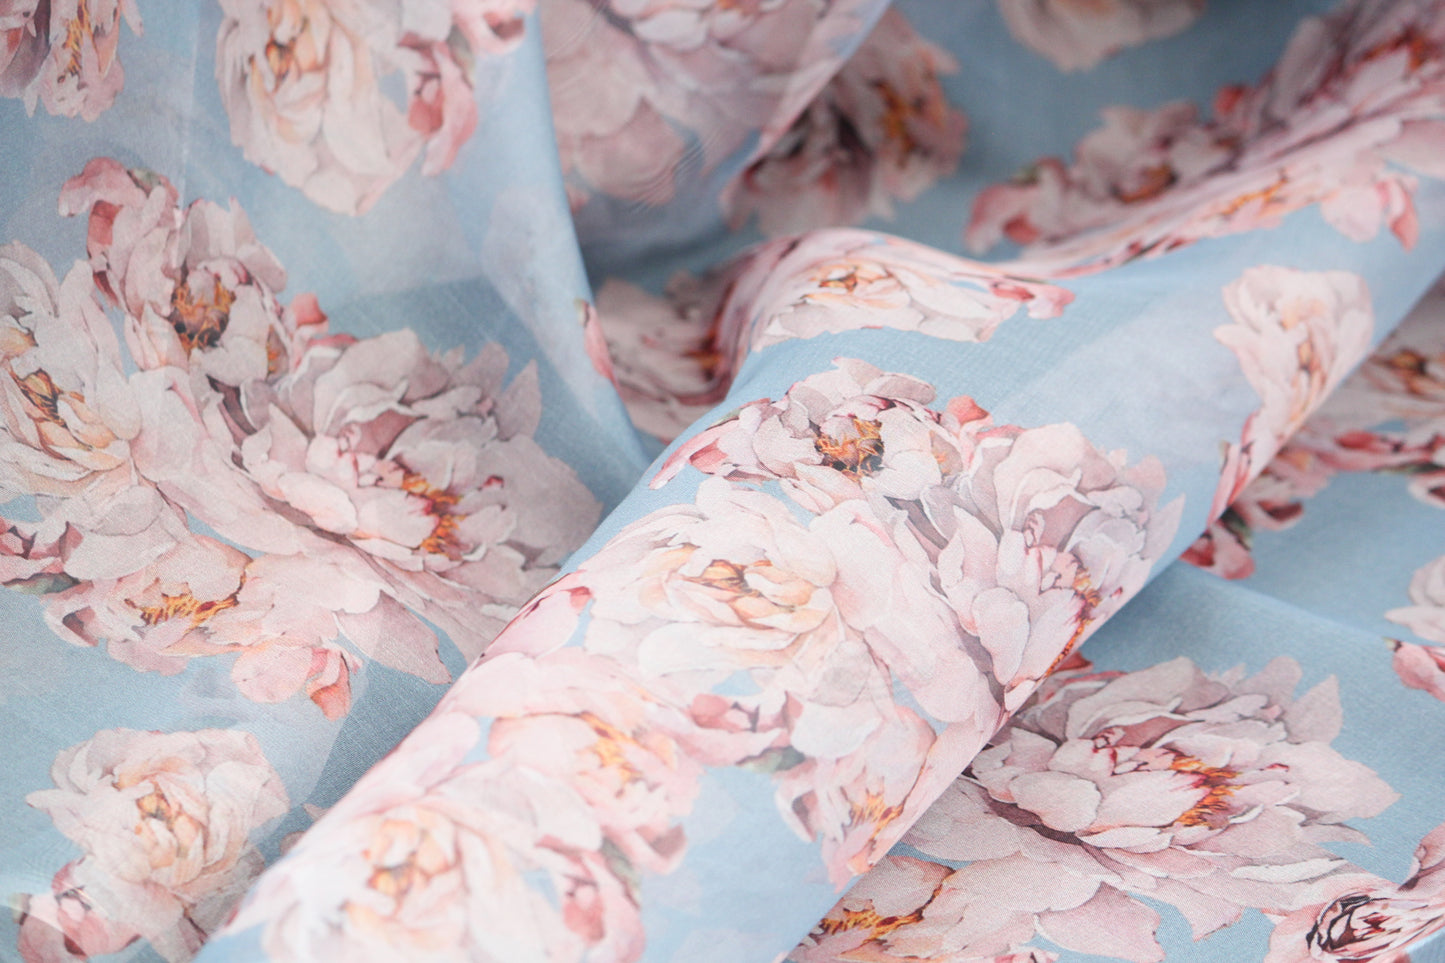 Organza fabric by the yard-Gorgeous watercolor look roses printed organza fabric